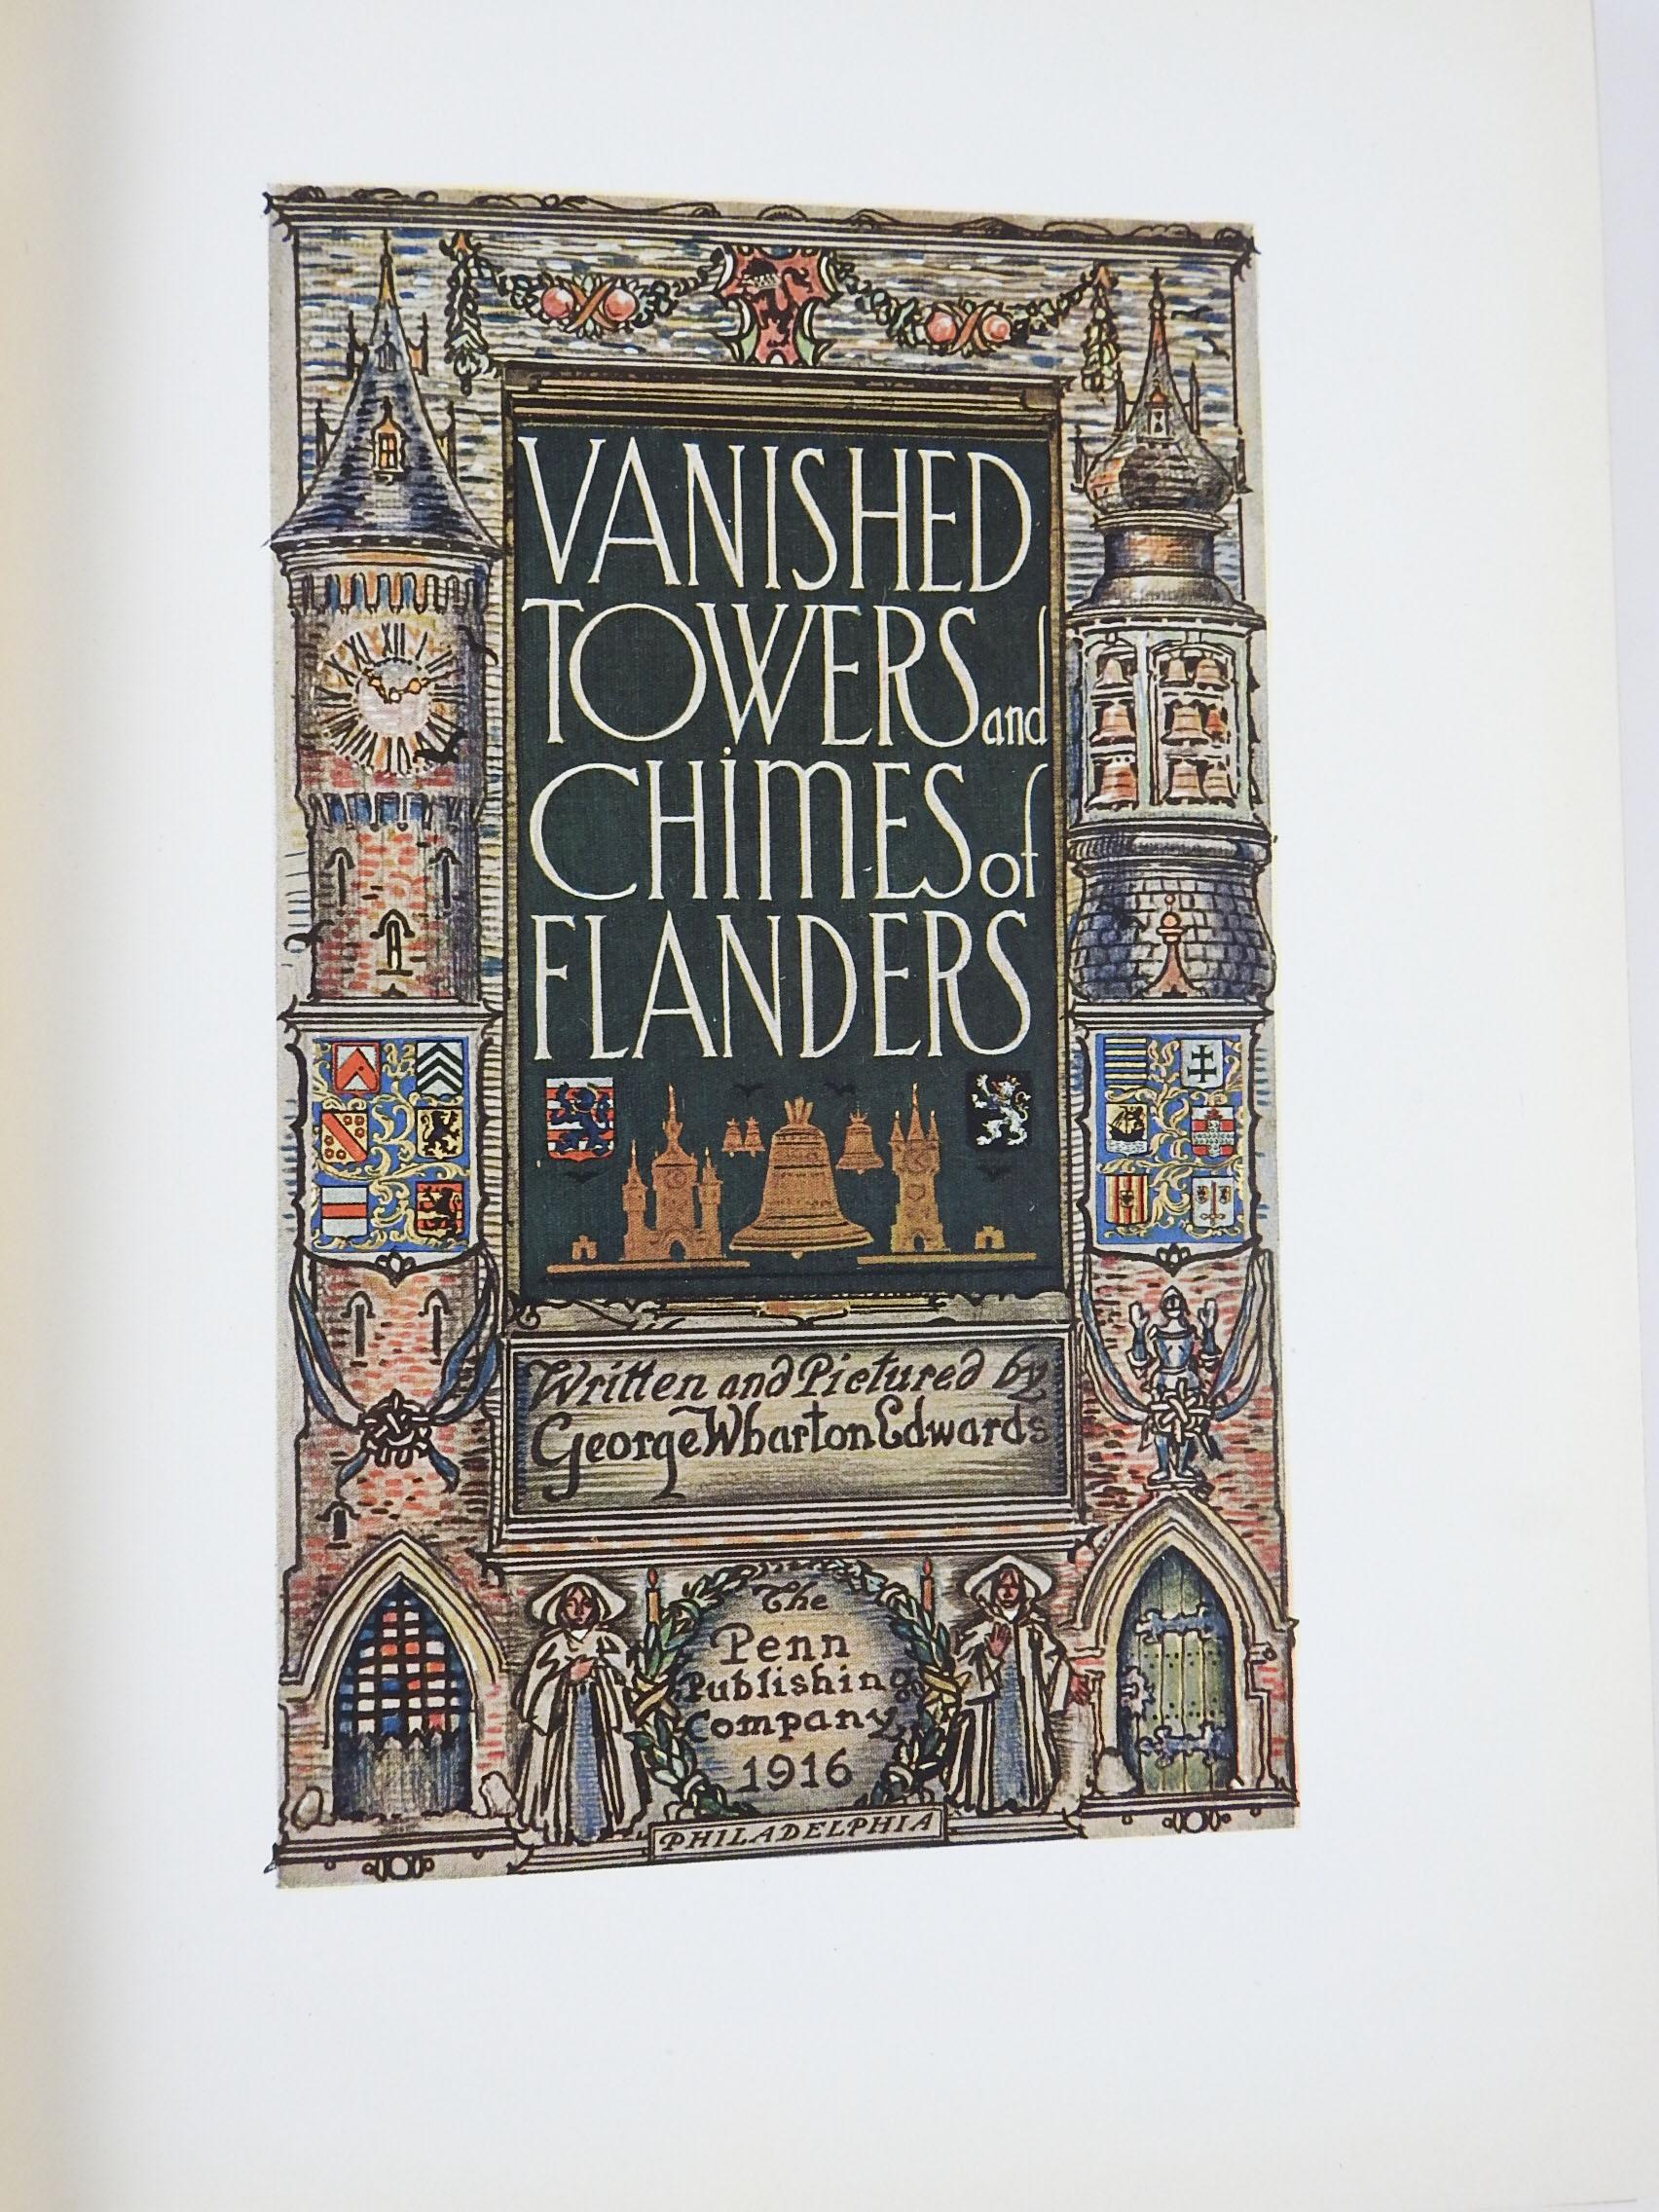 North American Vanished Towers and Chimes of Flanders Book For Sale